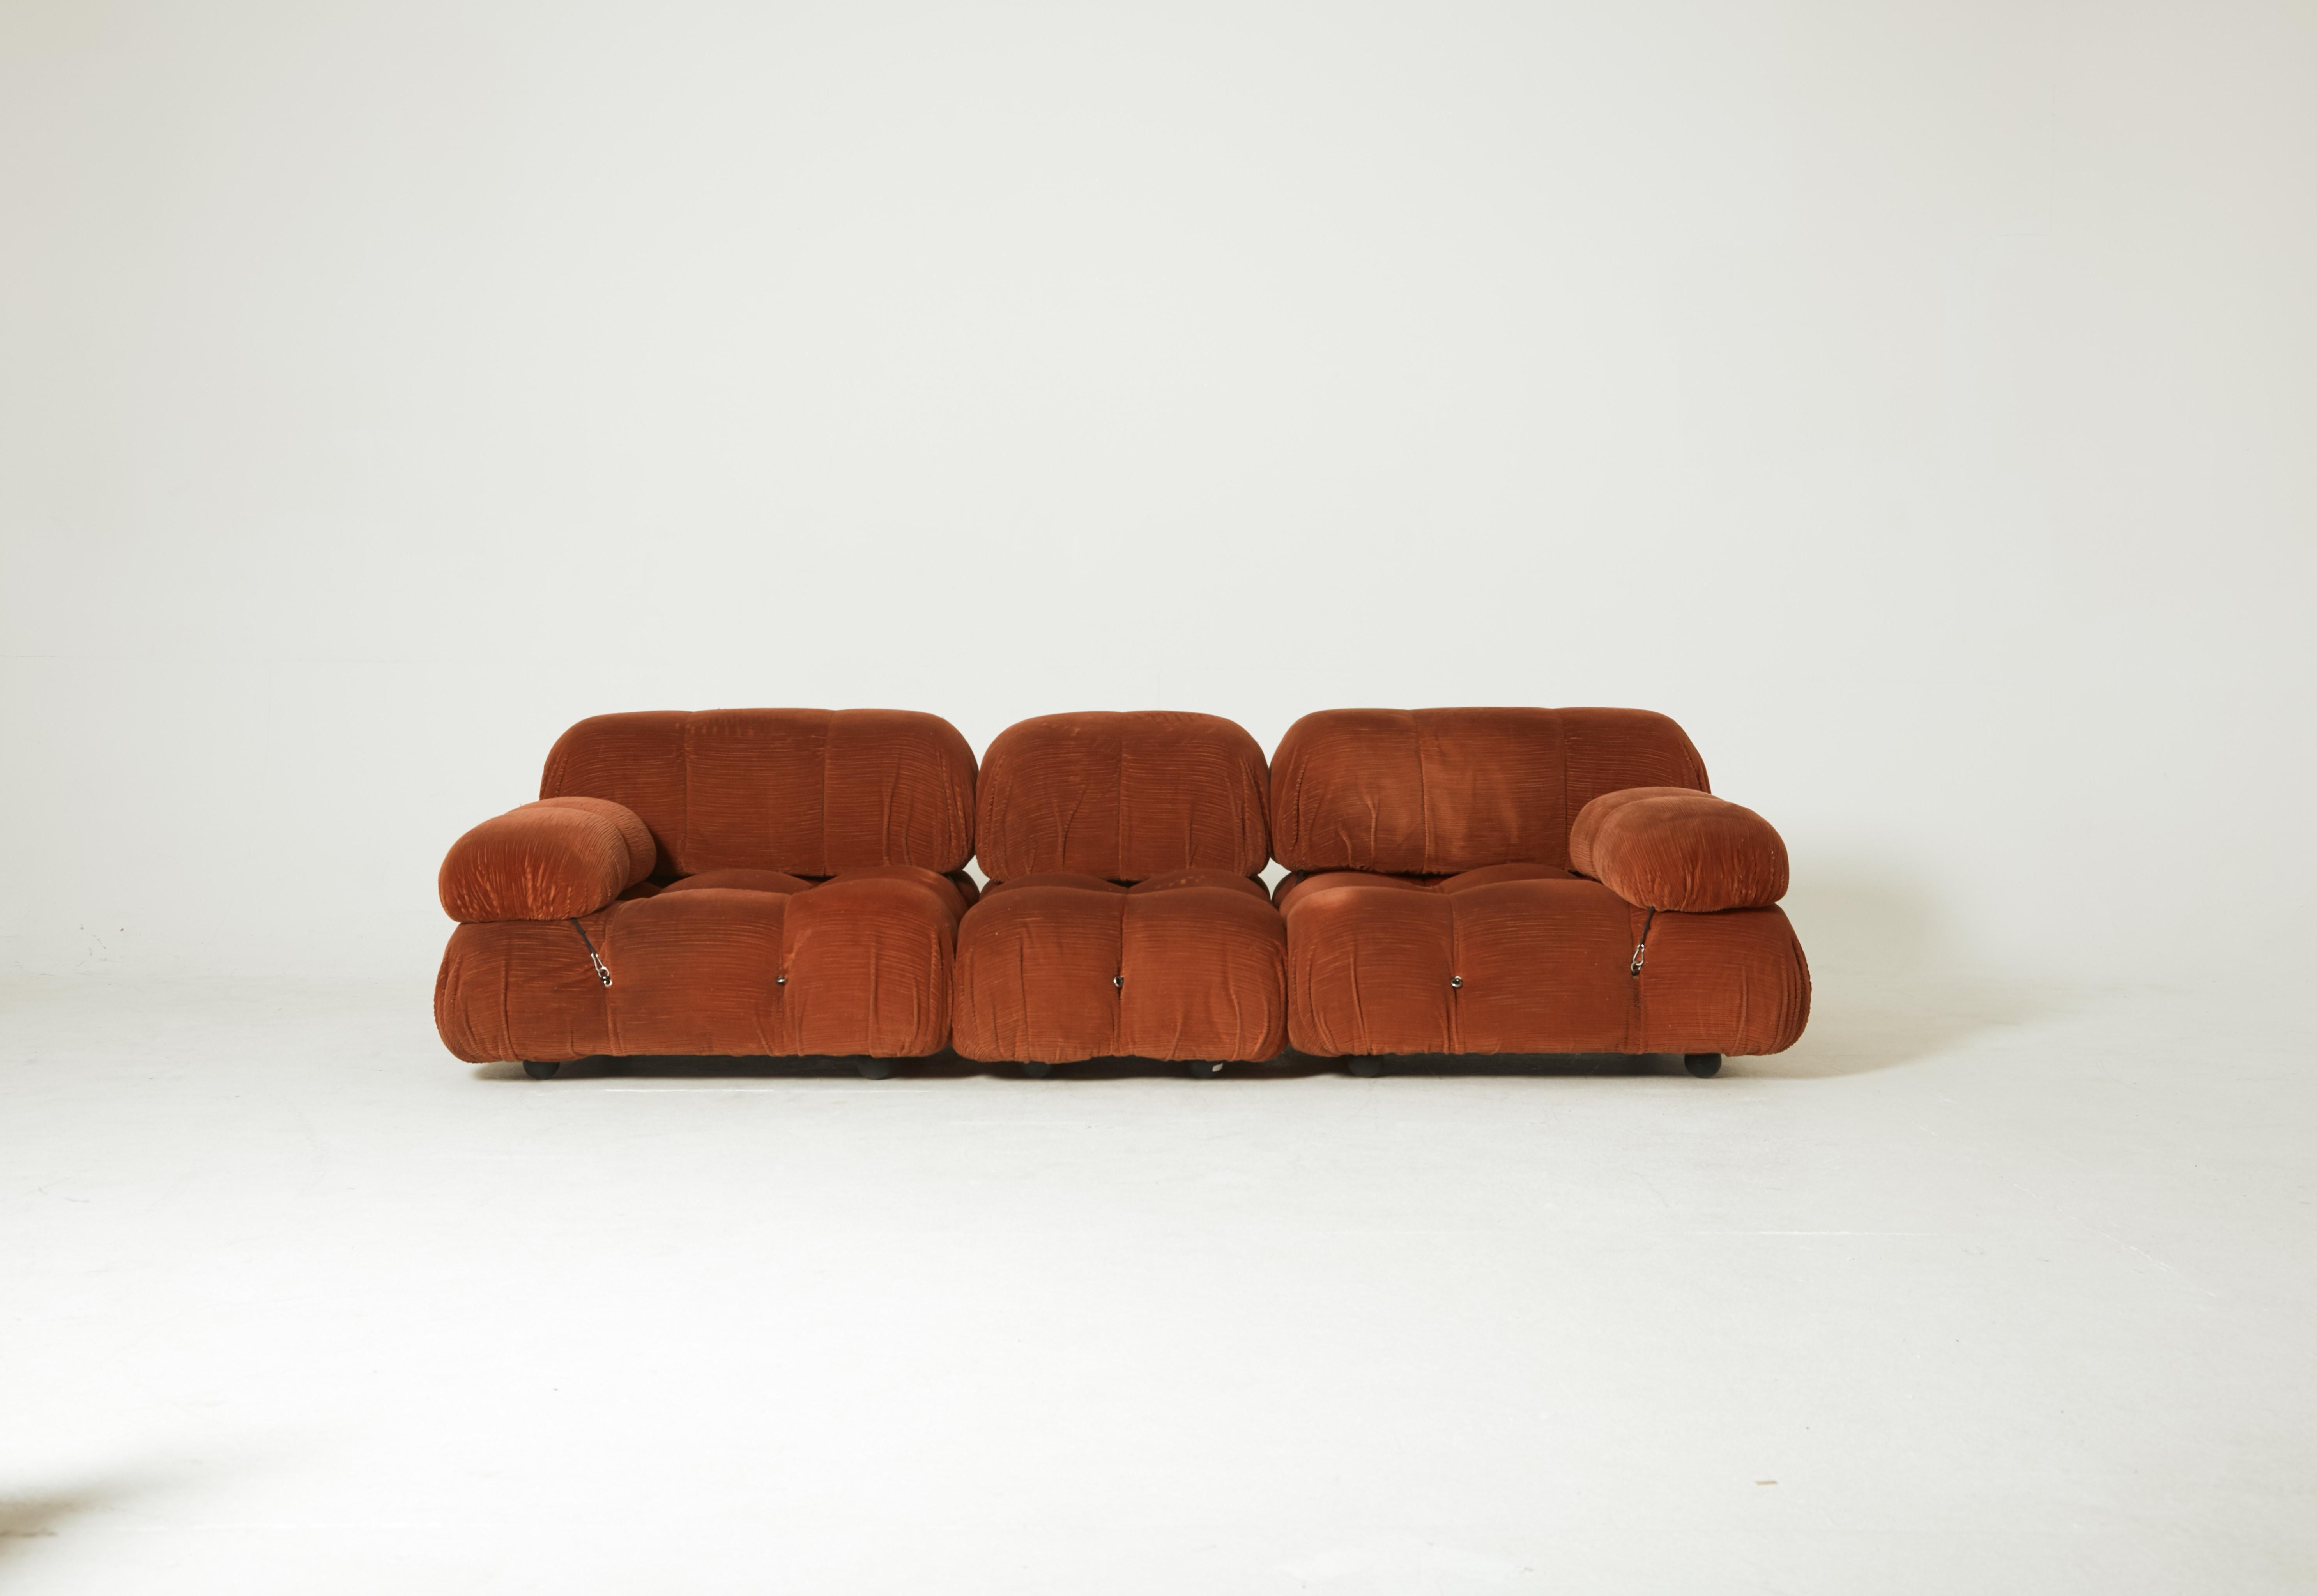 An extremely comfortable early three-seat / element Mario Bellini Camaleonda Modular Sofa. In original rusty orange fabric, made by C&B Italia (pre-B&B Italia), Italy, 1970s. All parts are interchangeable. Can be purchased as is in its original